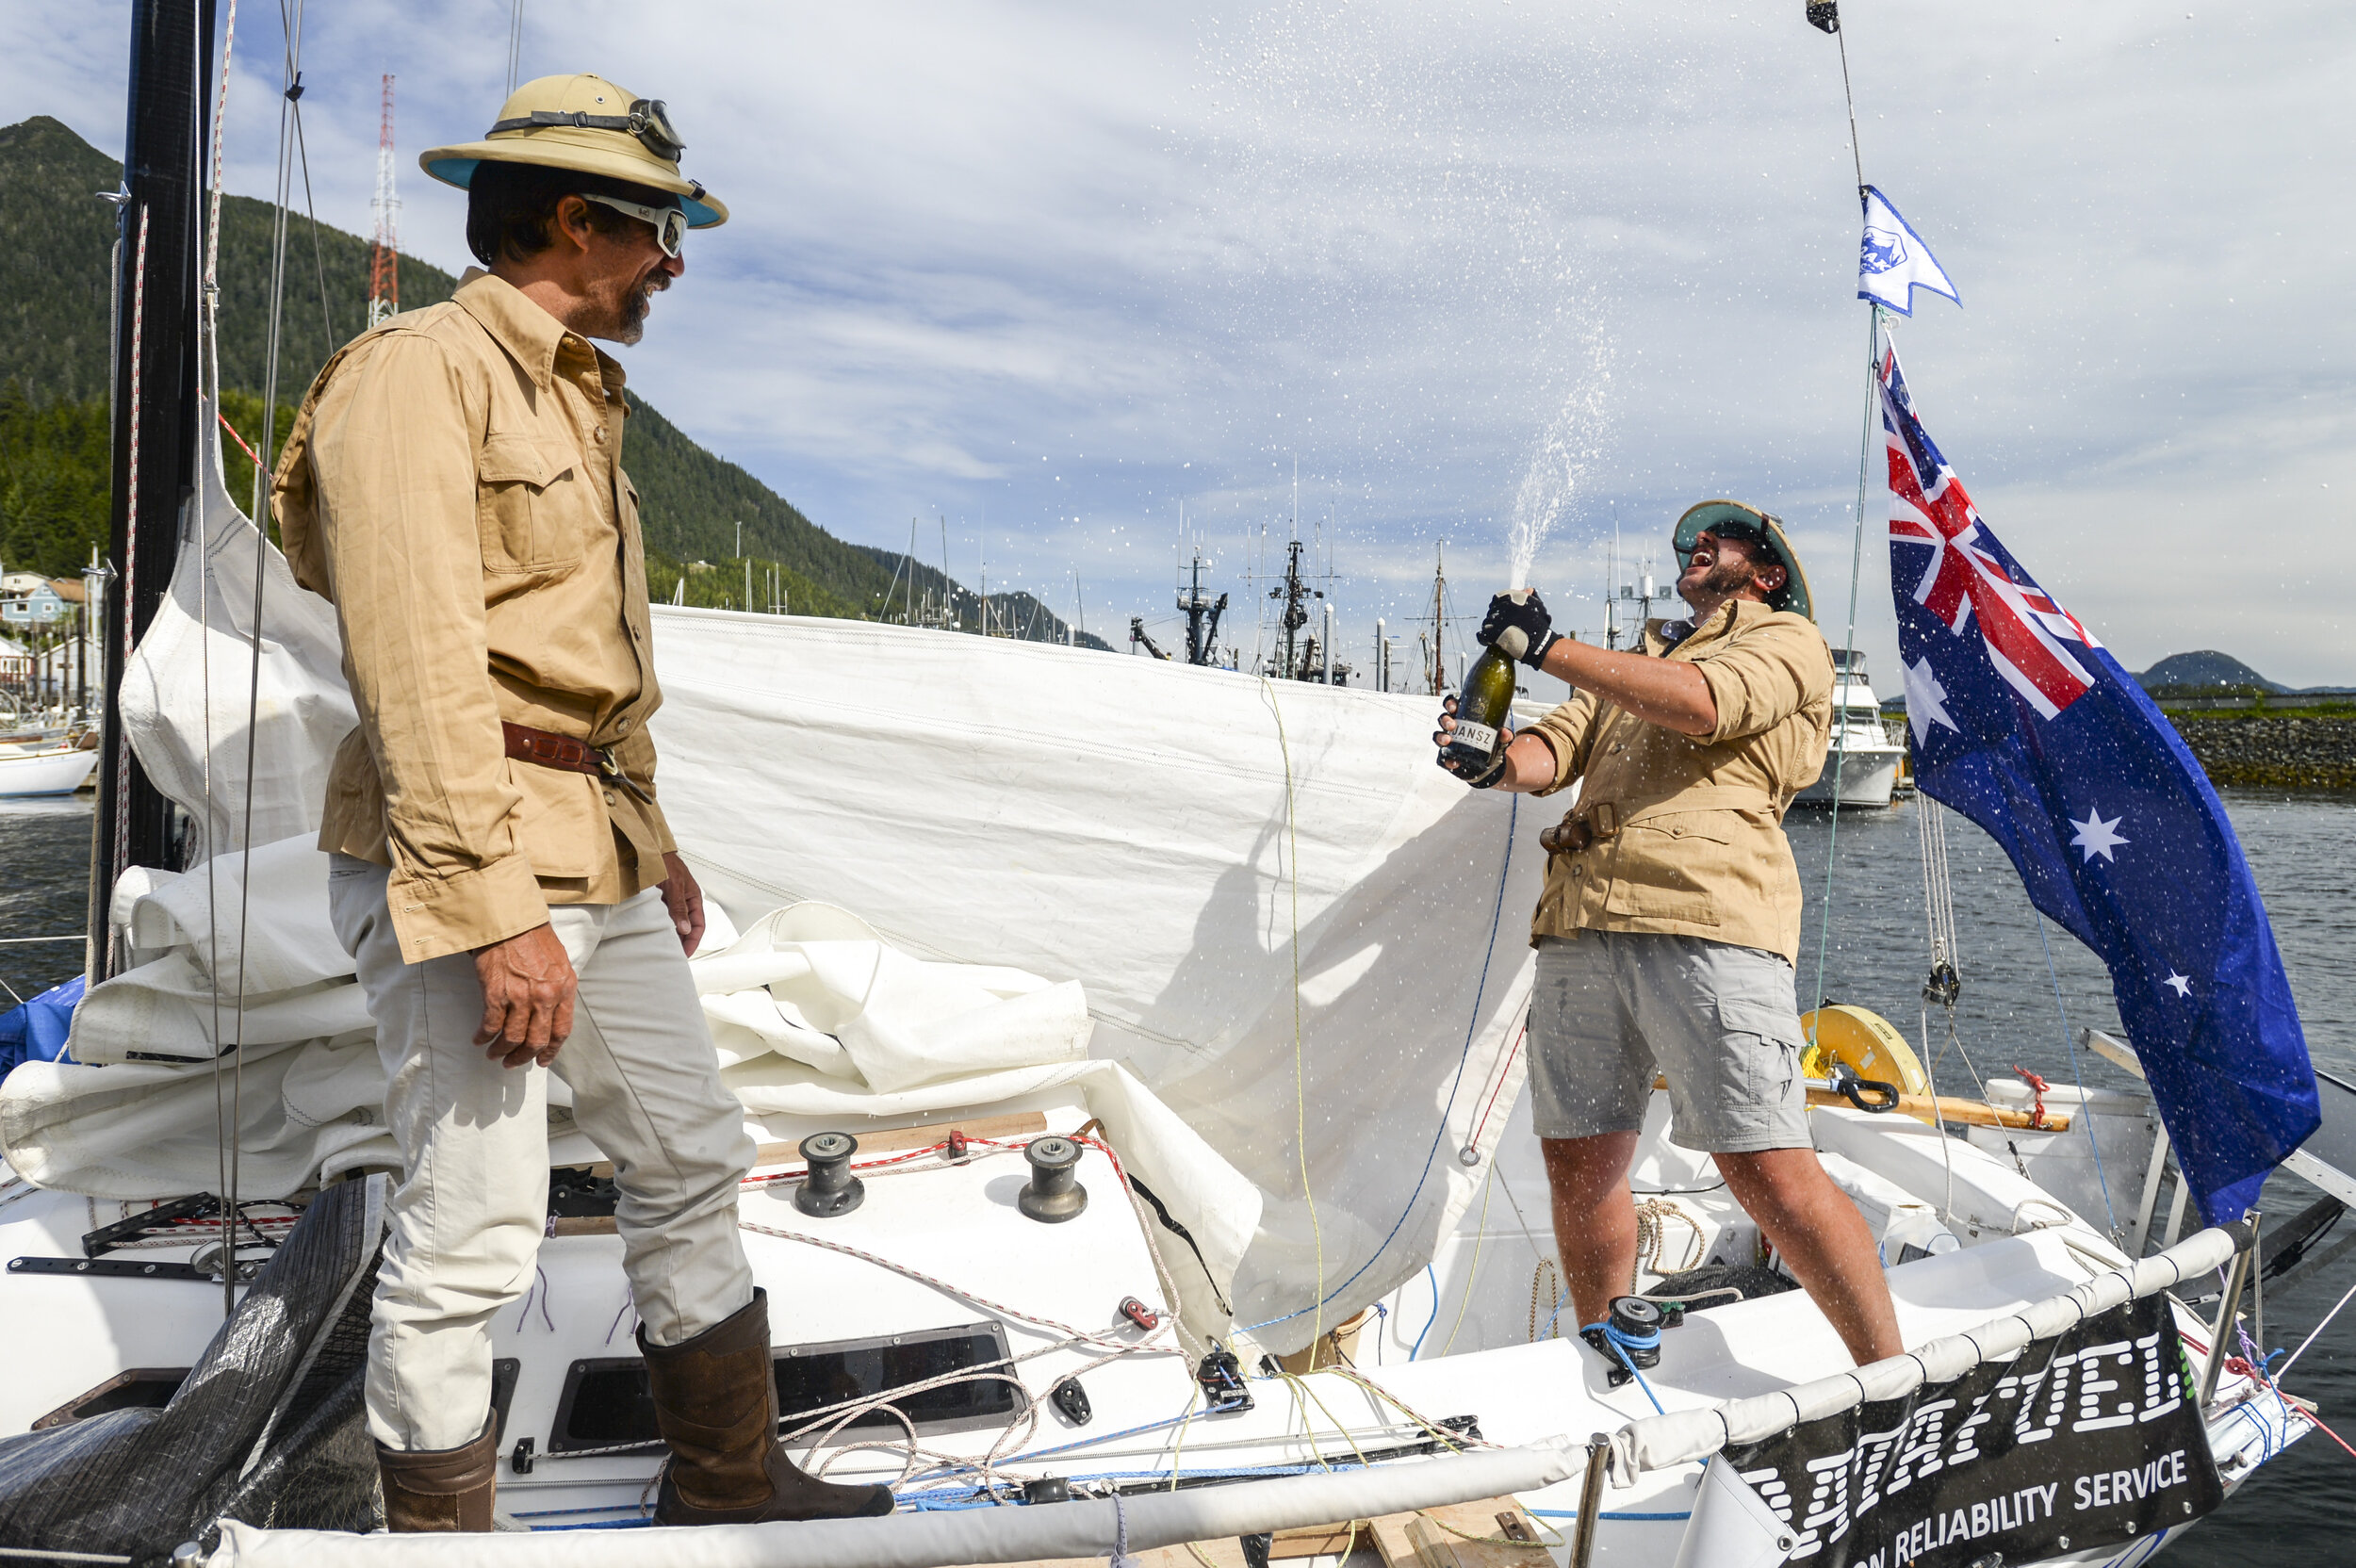  Michael Scholz watches as Frederic Chanut, right, pops a bottle of champagne Friday, June 23, 2017, as the pair finished the Race To Alaska. © Ketchikan Daily News 